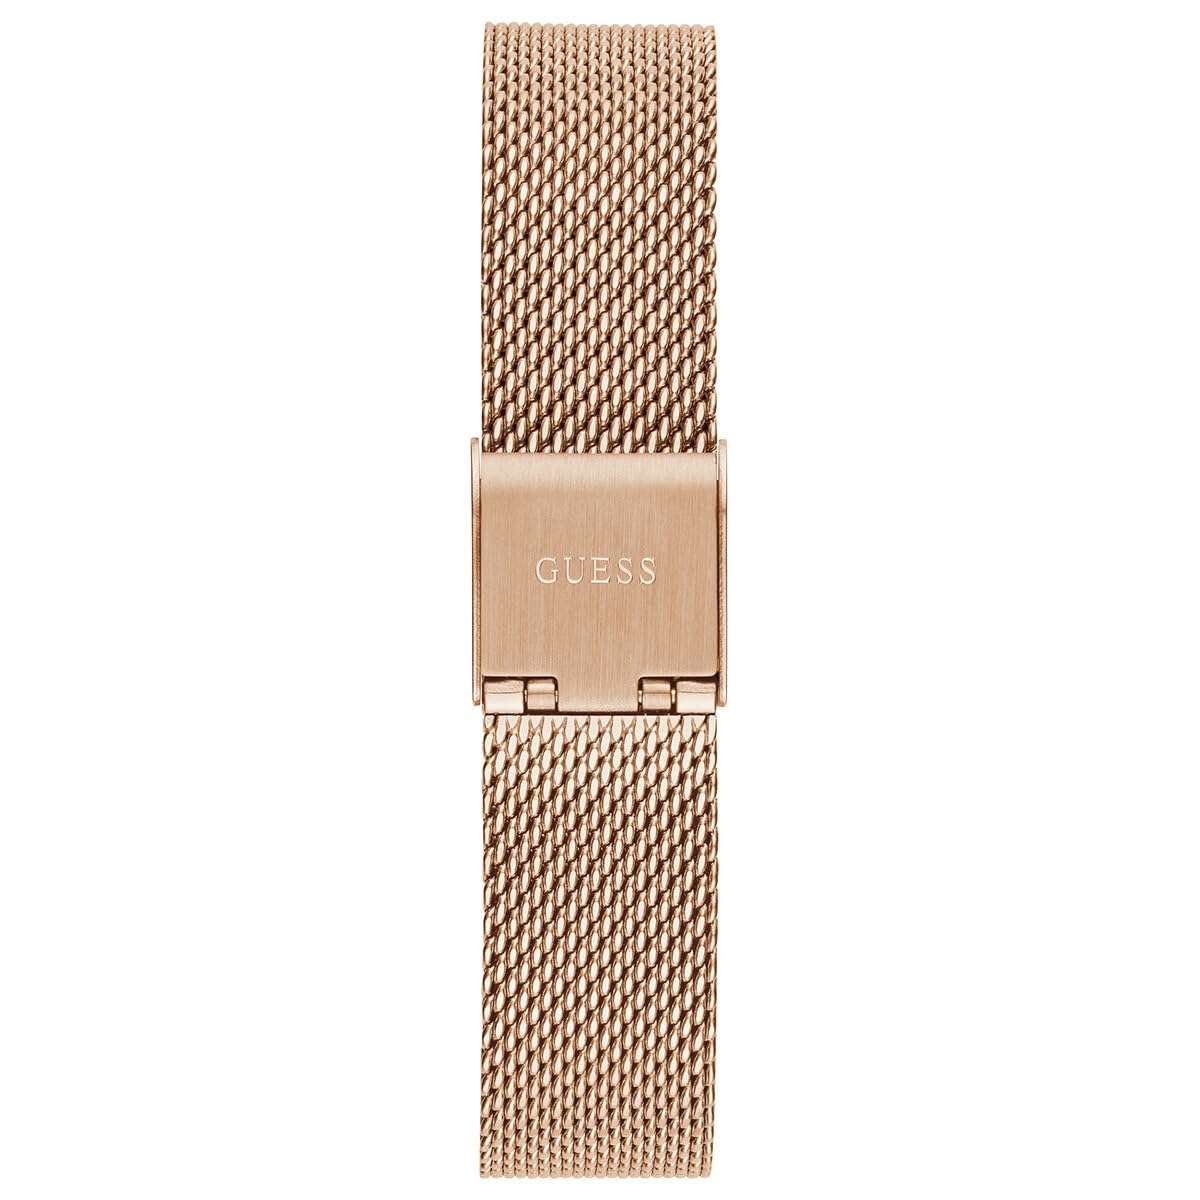 GUESS Rose Gold-Tone and Crystal Analog Watch